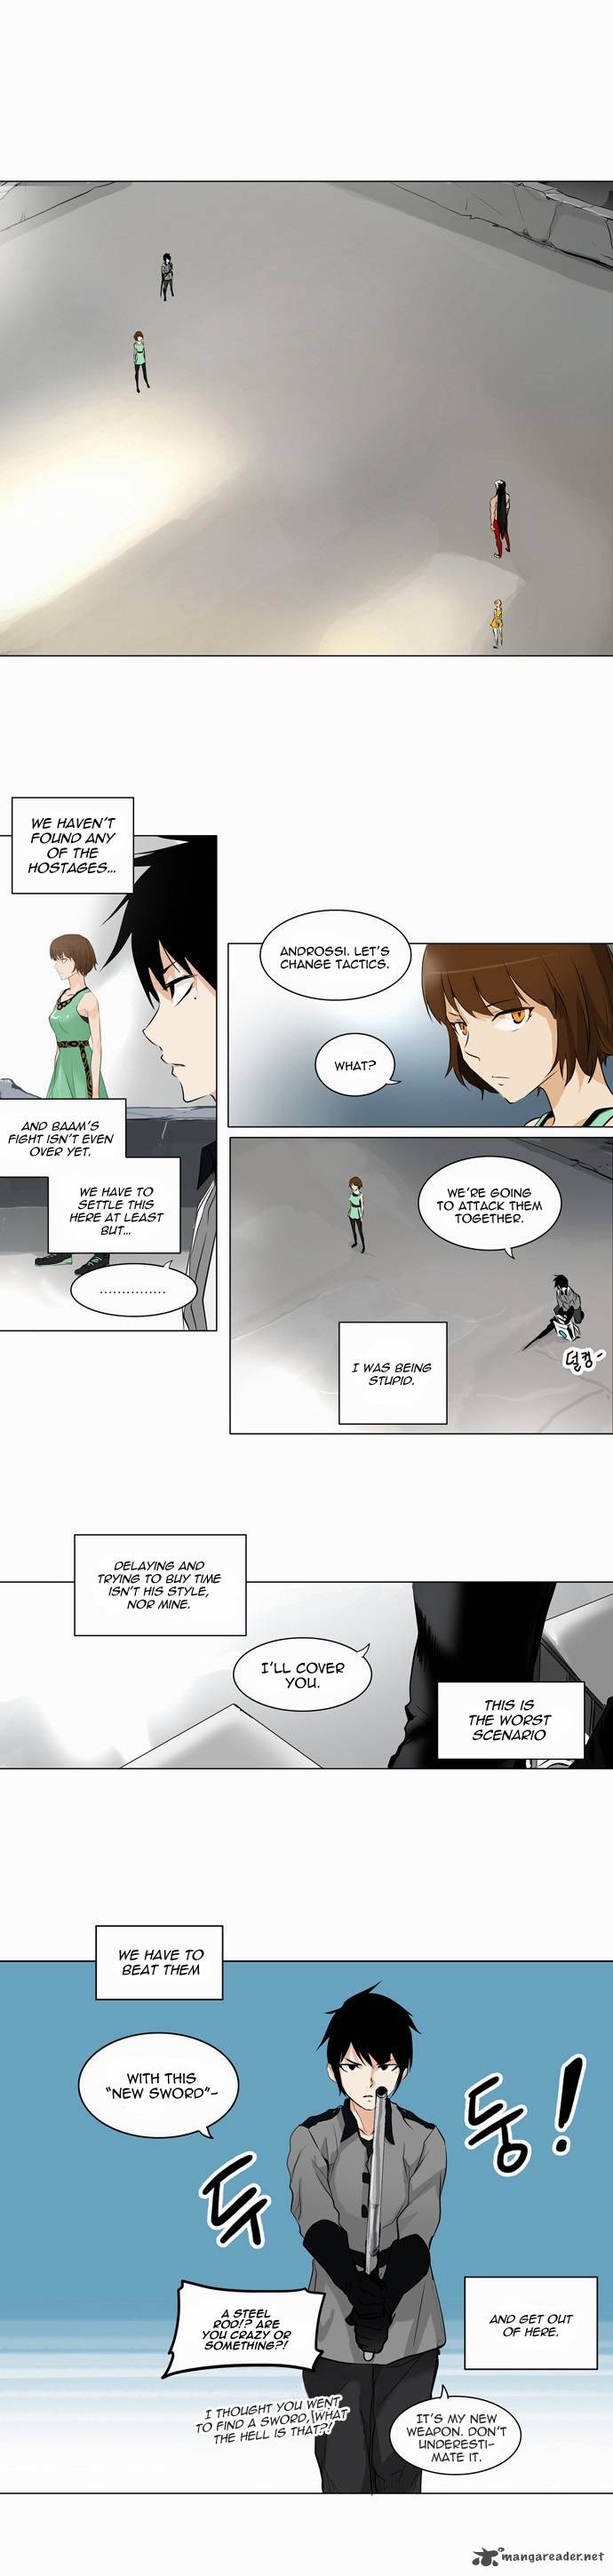 Tower Of God 183 11